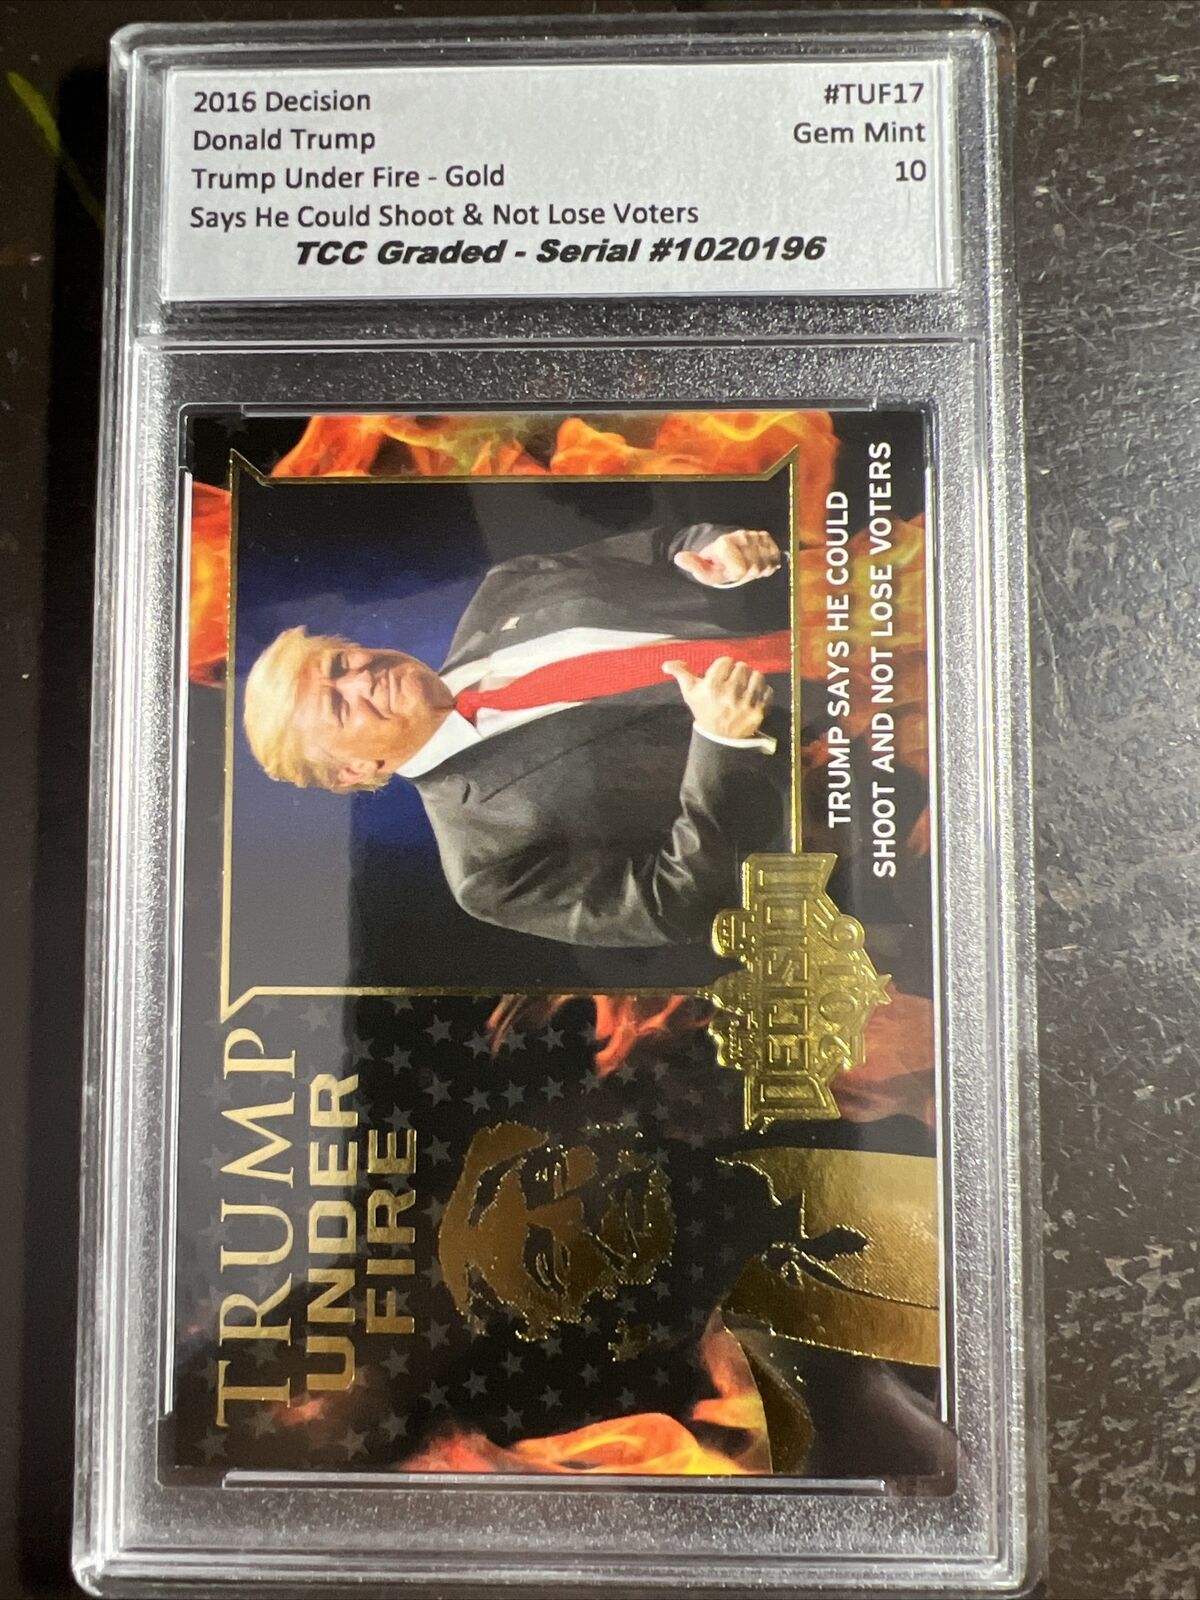 2016 Decision Donald Trump Under Fire Shoot And Not Lose Vote Graded Gem Mint 10